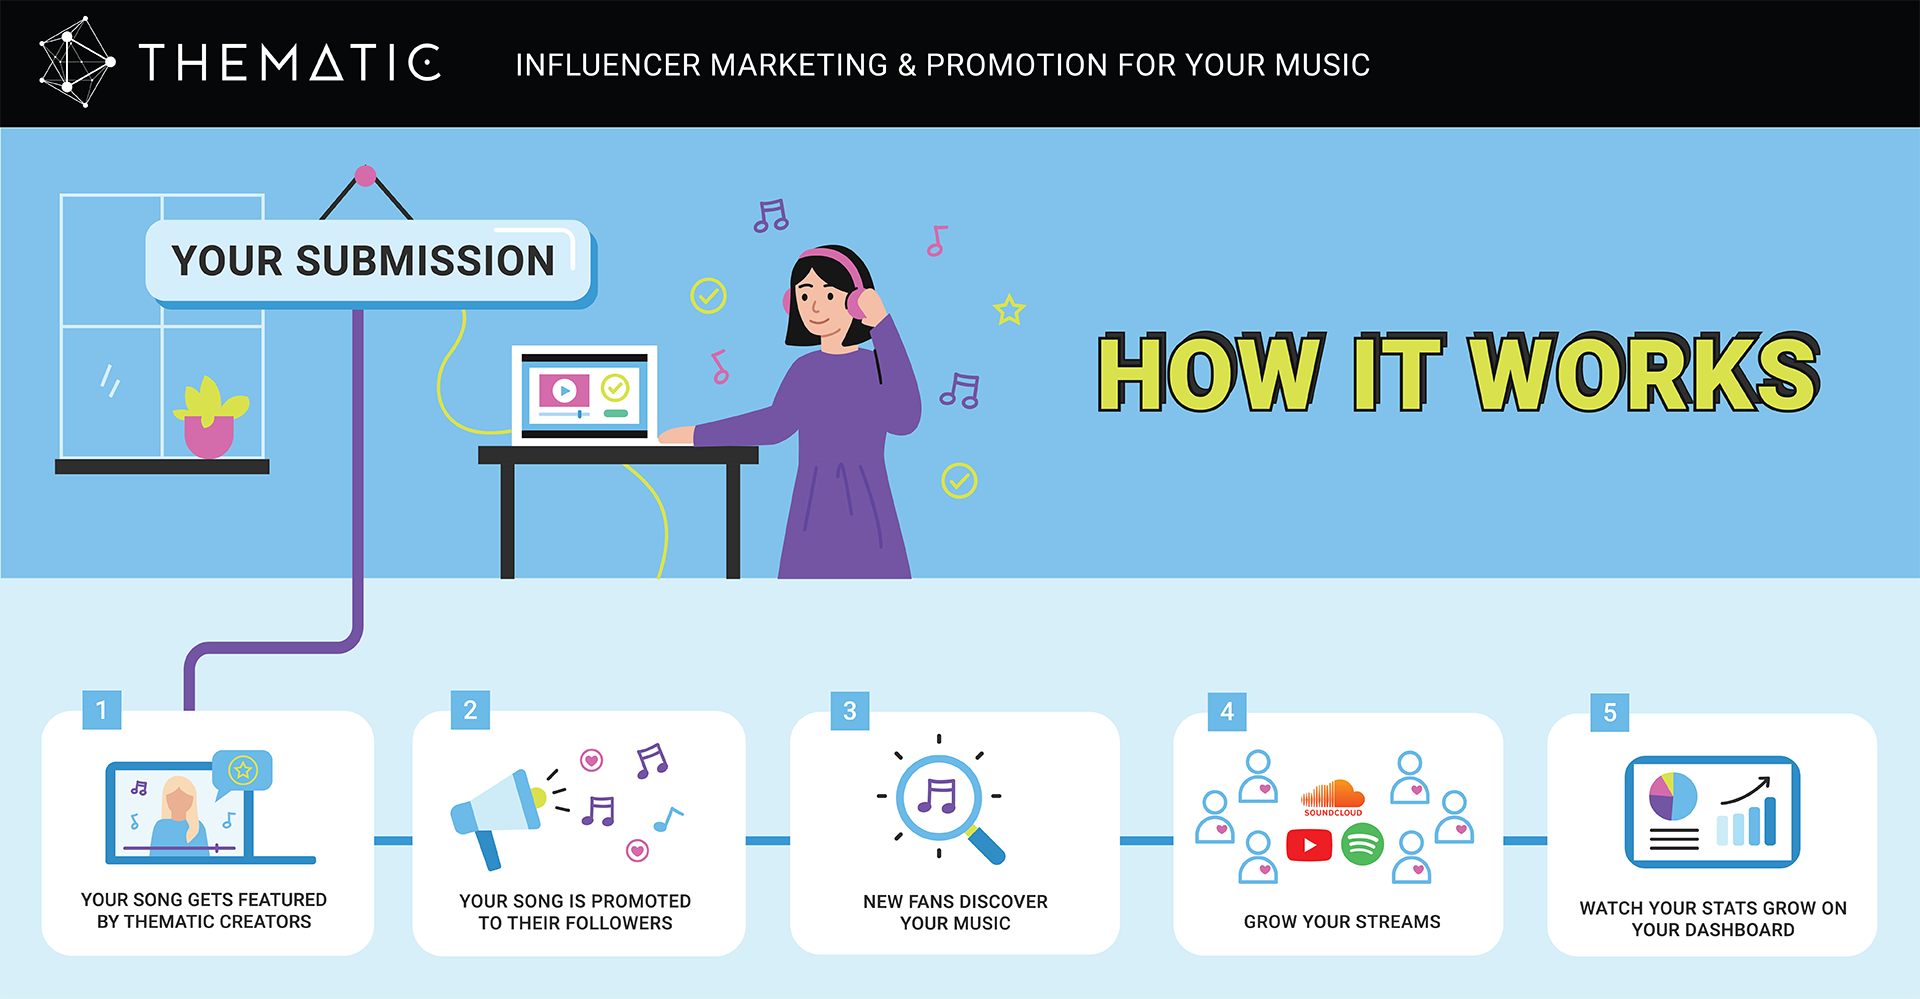 Thematic matches your music to influencers who promote your songs in their YouTube videos